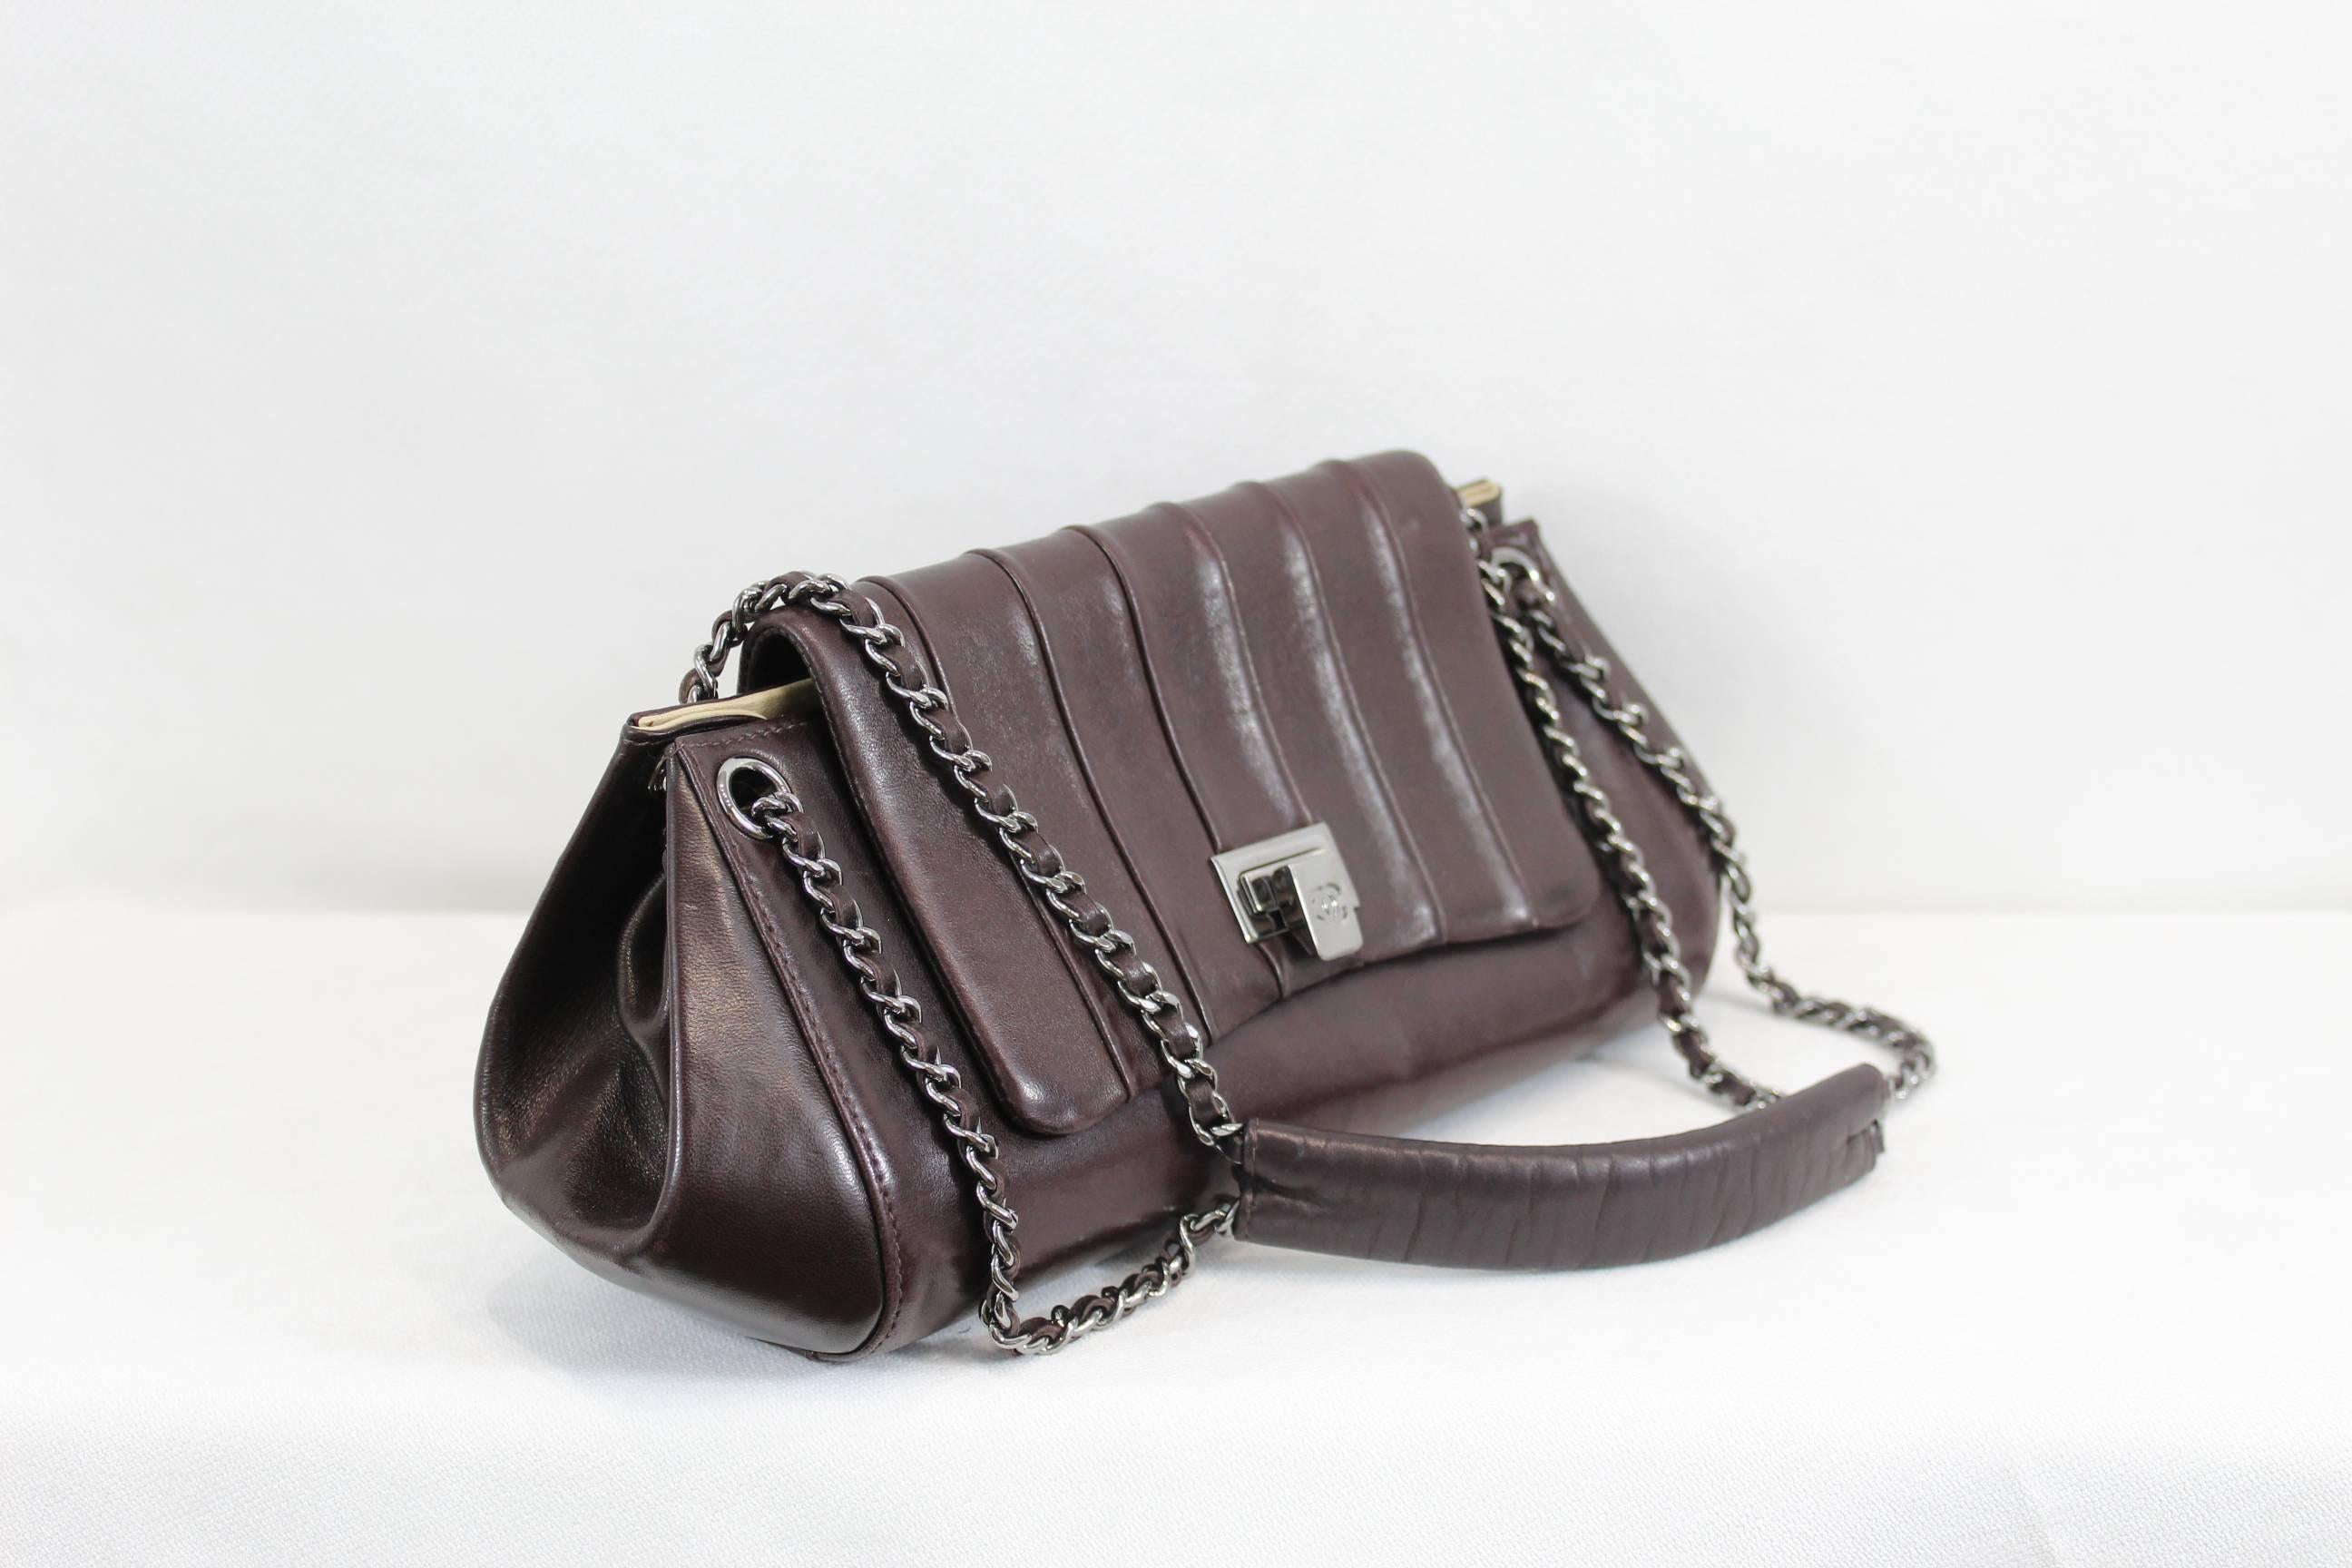 Gray Chanel Brown Leather Small Shoulder Shopping Bag